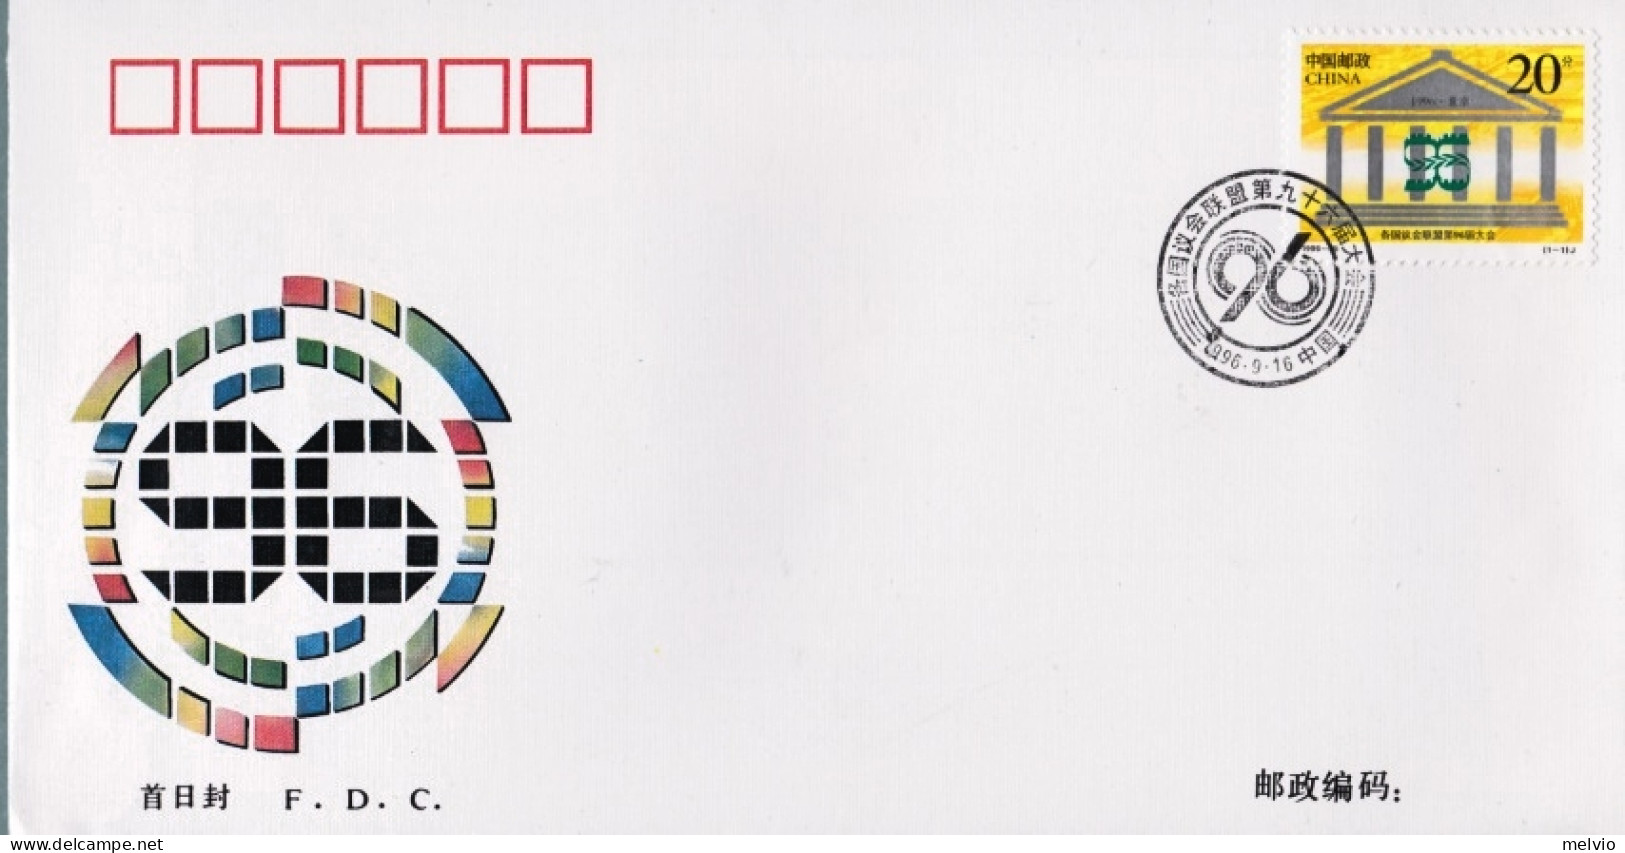 1996-Cina China 25, Scott 2723 The 96th Conference Of Inter China Parliamentary  - Storia Postale